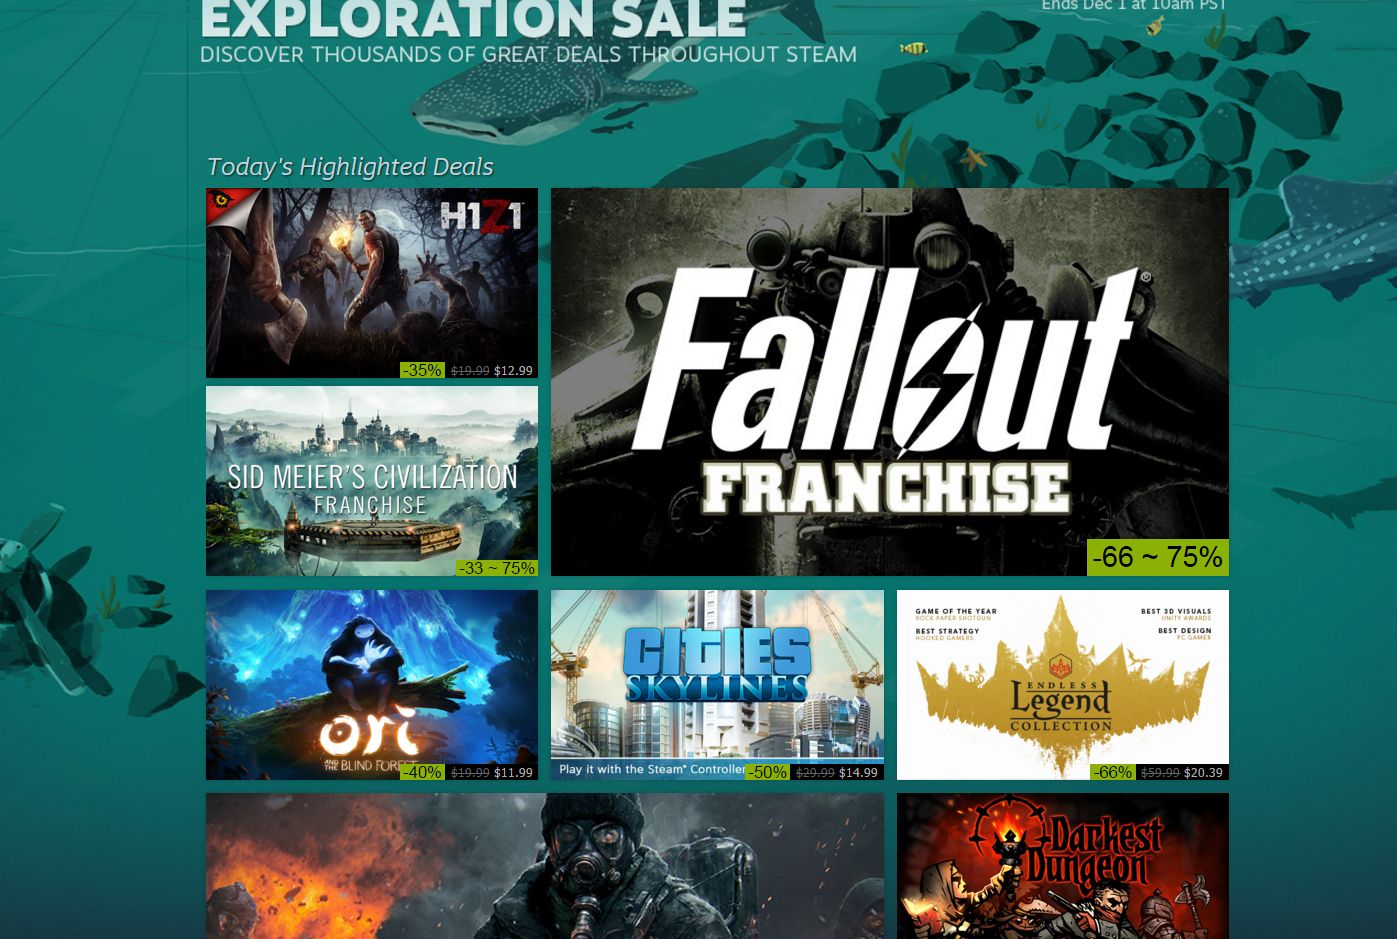 Image for The Exploration Sale is live on Steam - save money through December 1